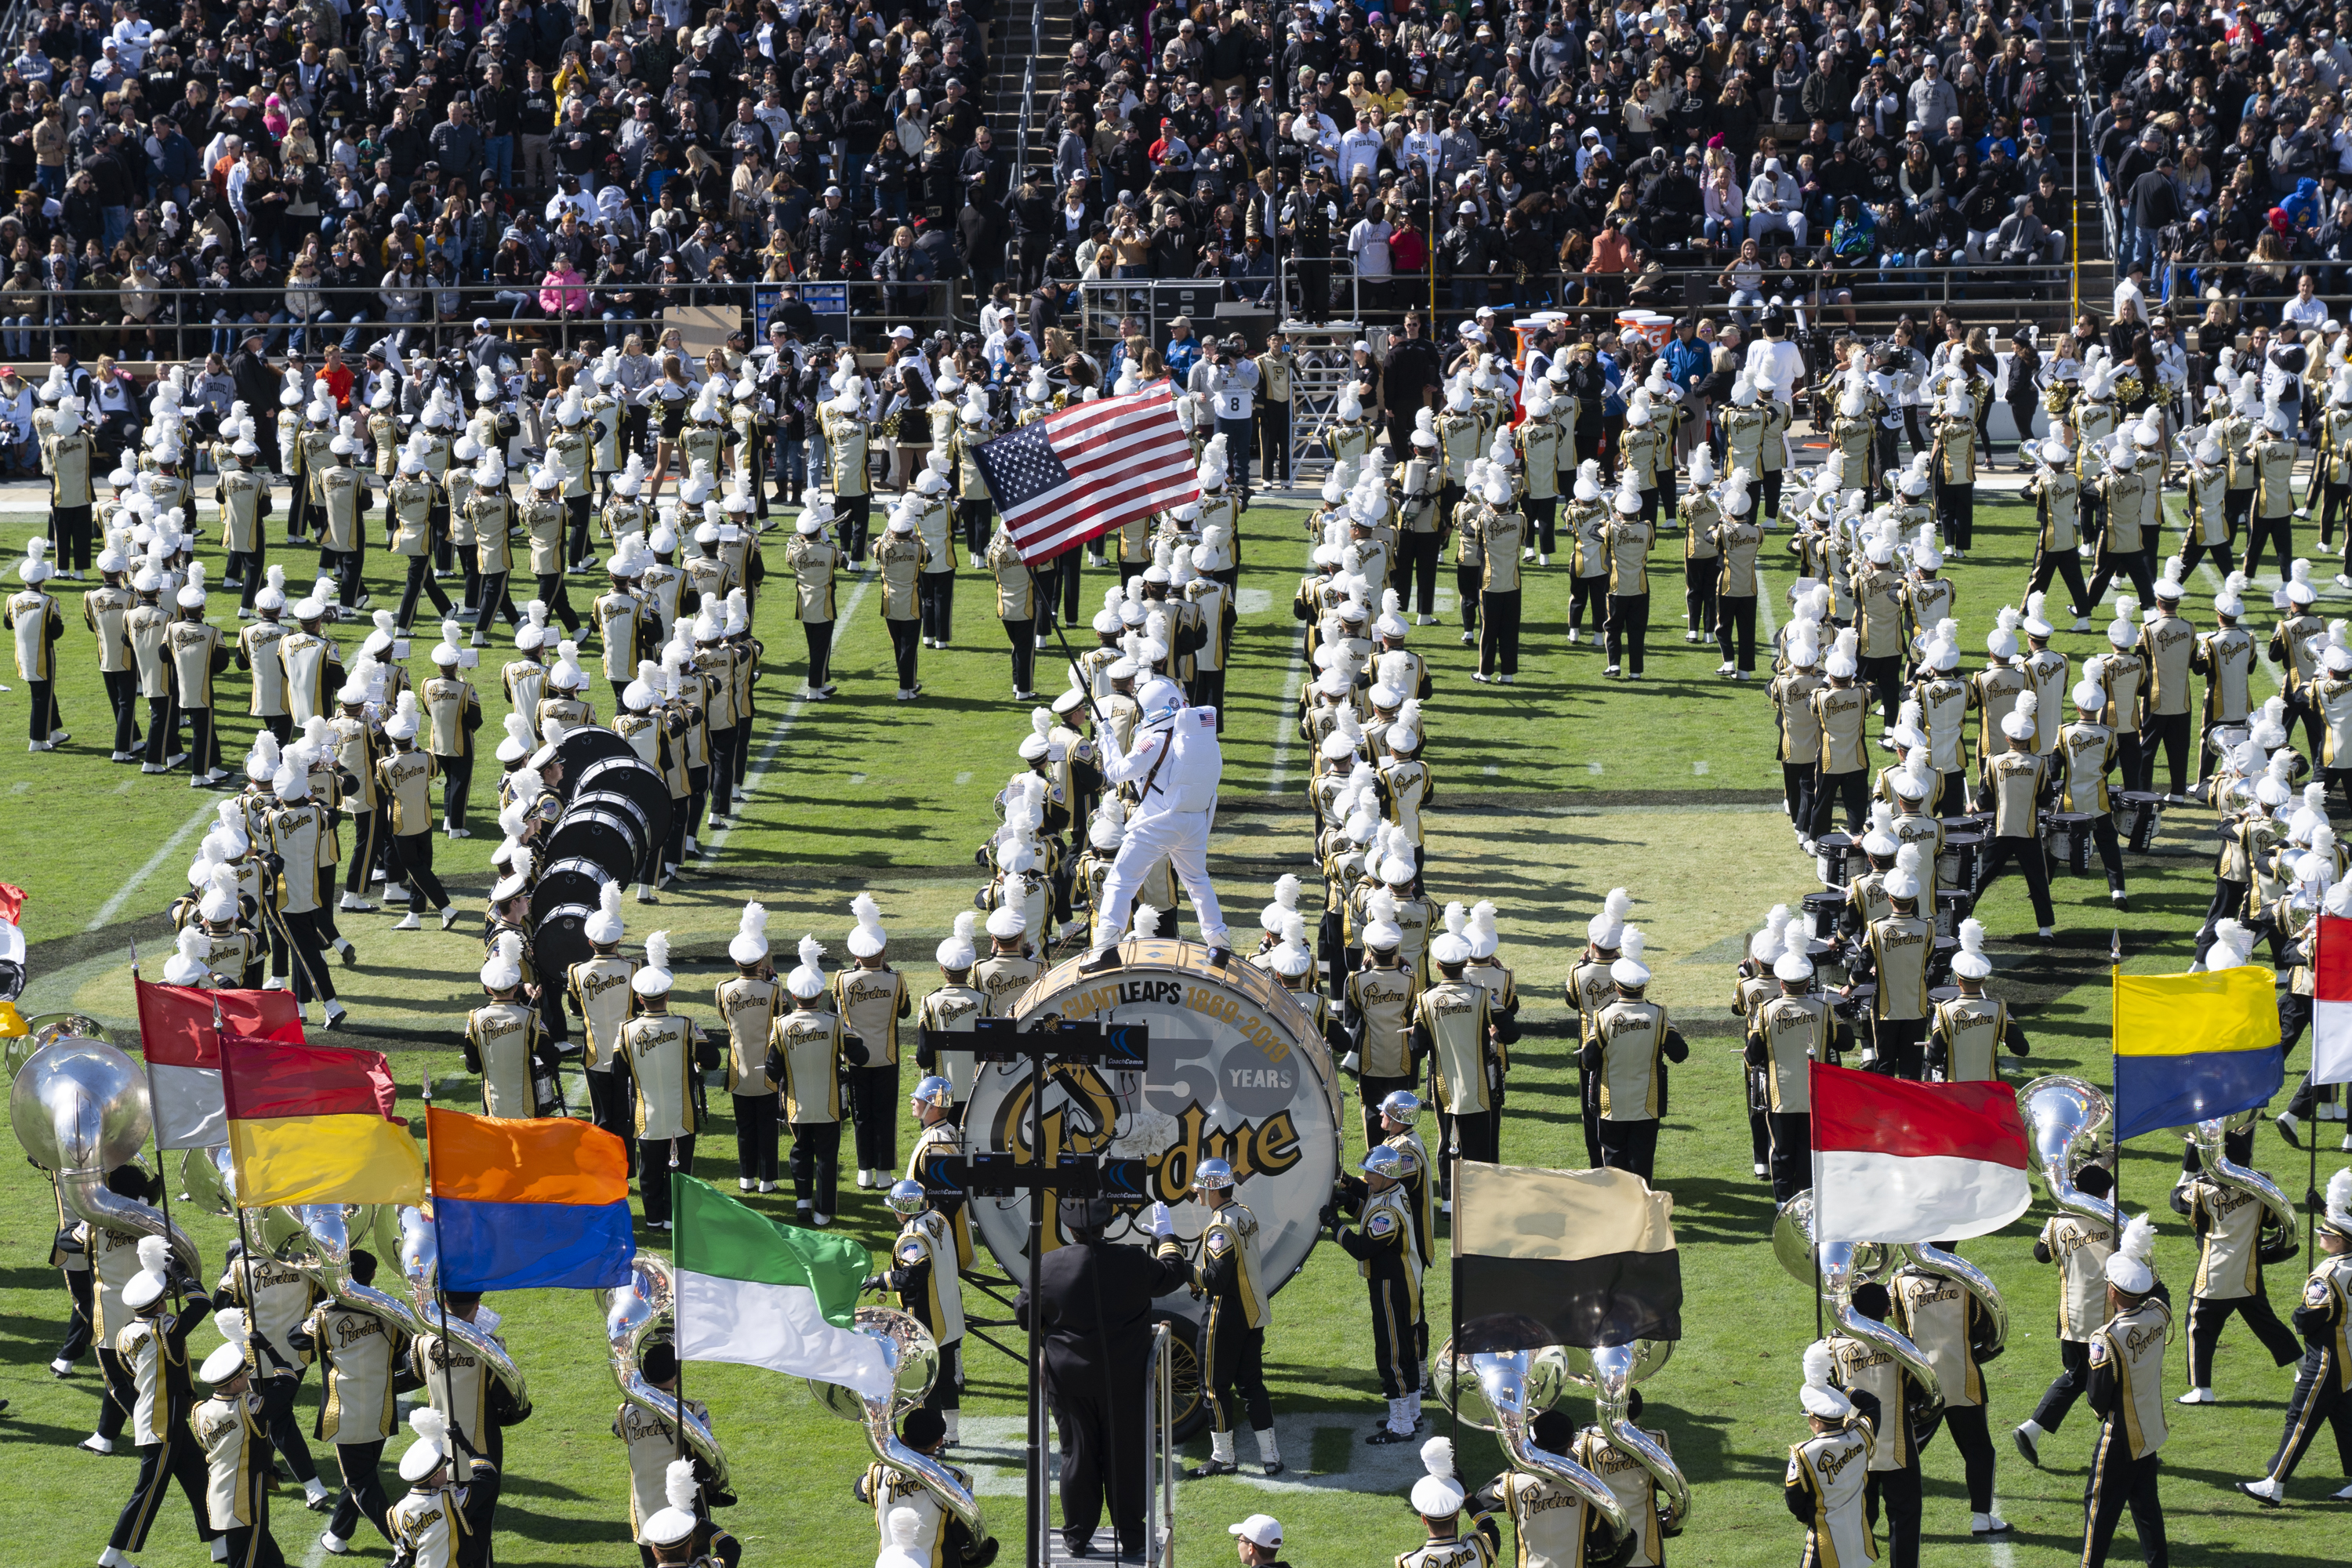 The Purdue "All-American" Marching Band peforms at halftime of the homecoming football game in 2019